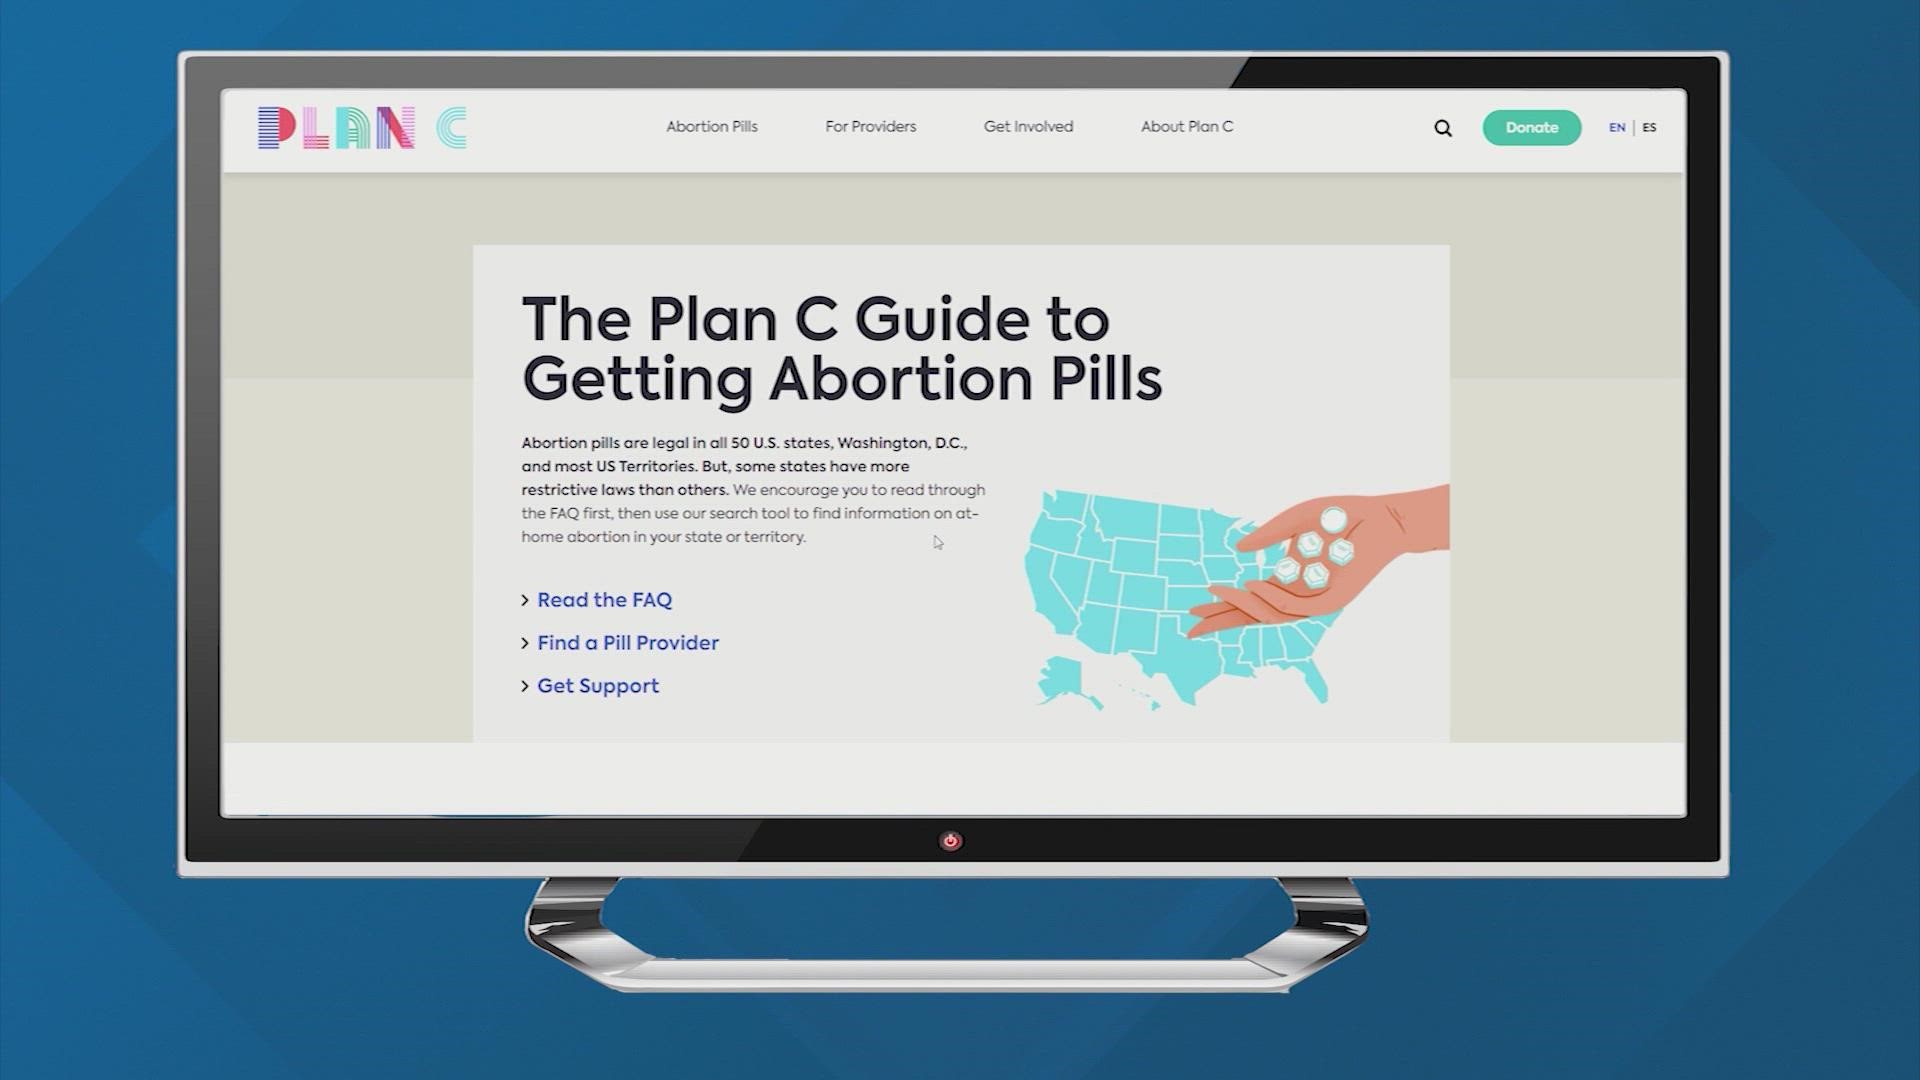 Abortion pills are legal in all 50 states, but some have more restrictive laws than others.